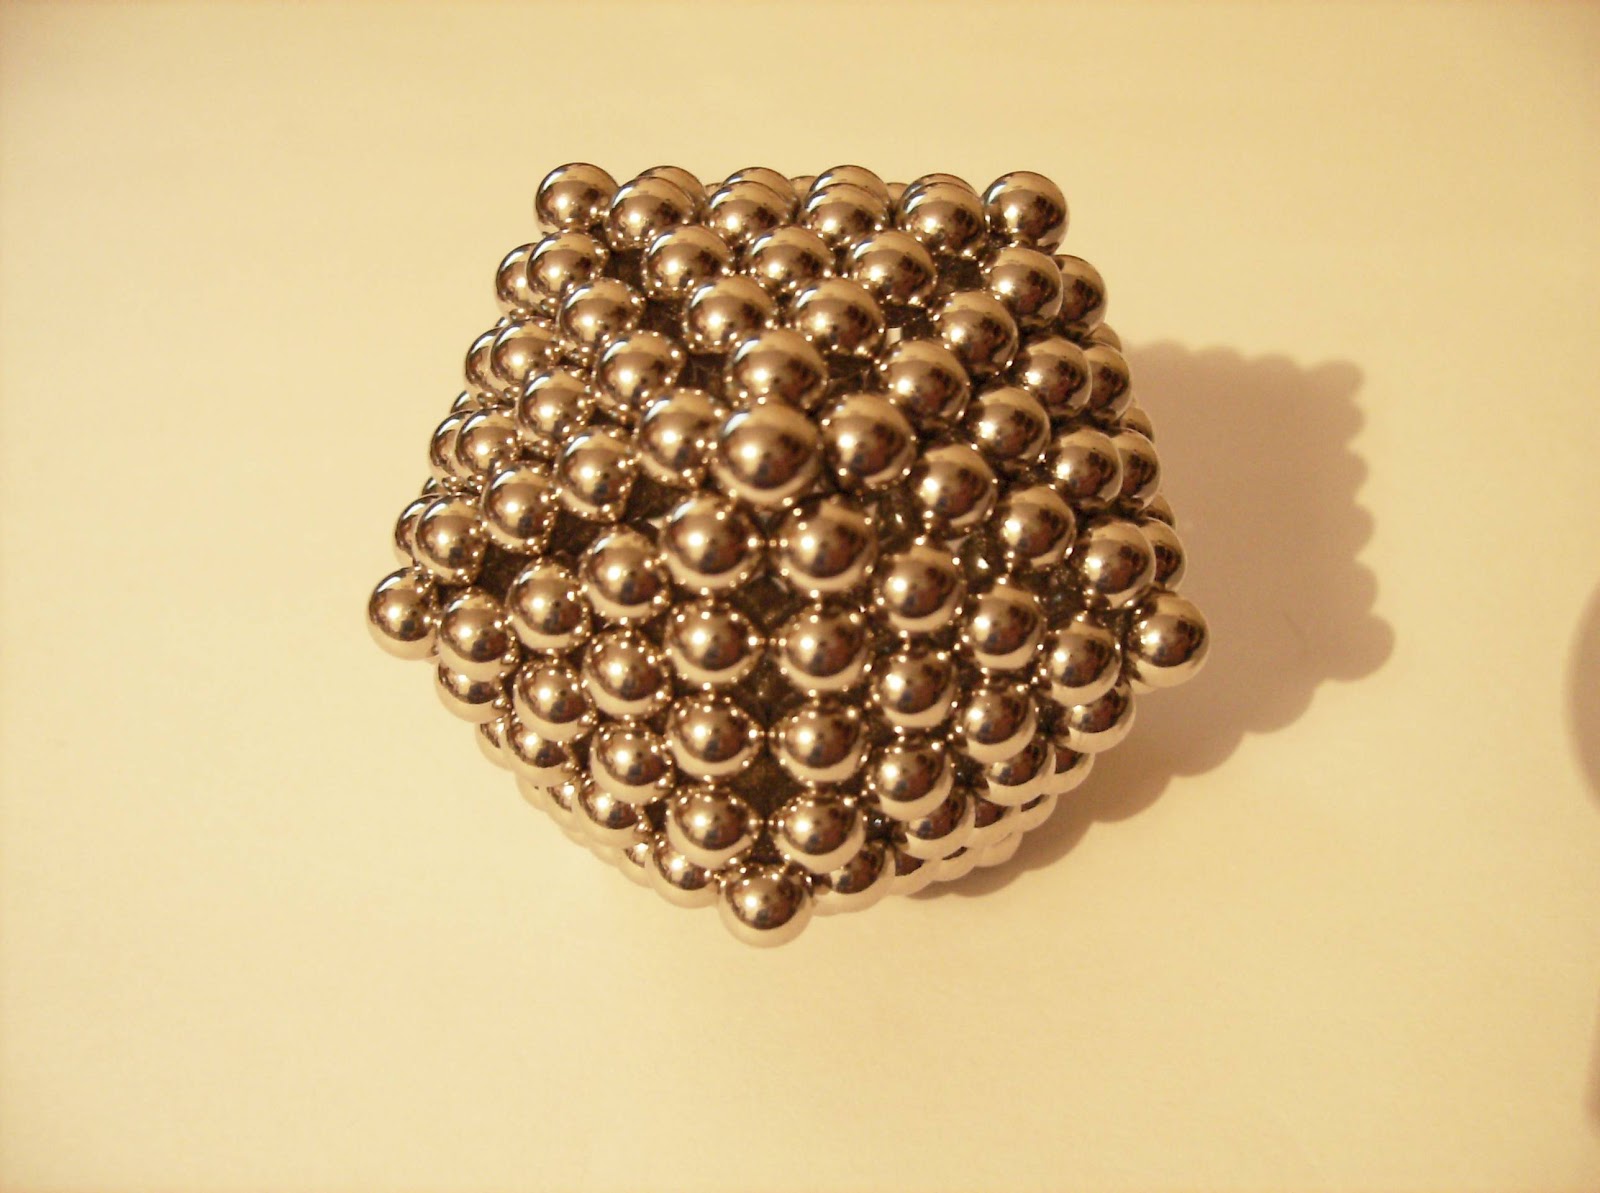 icosahedron made of zen magnets